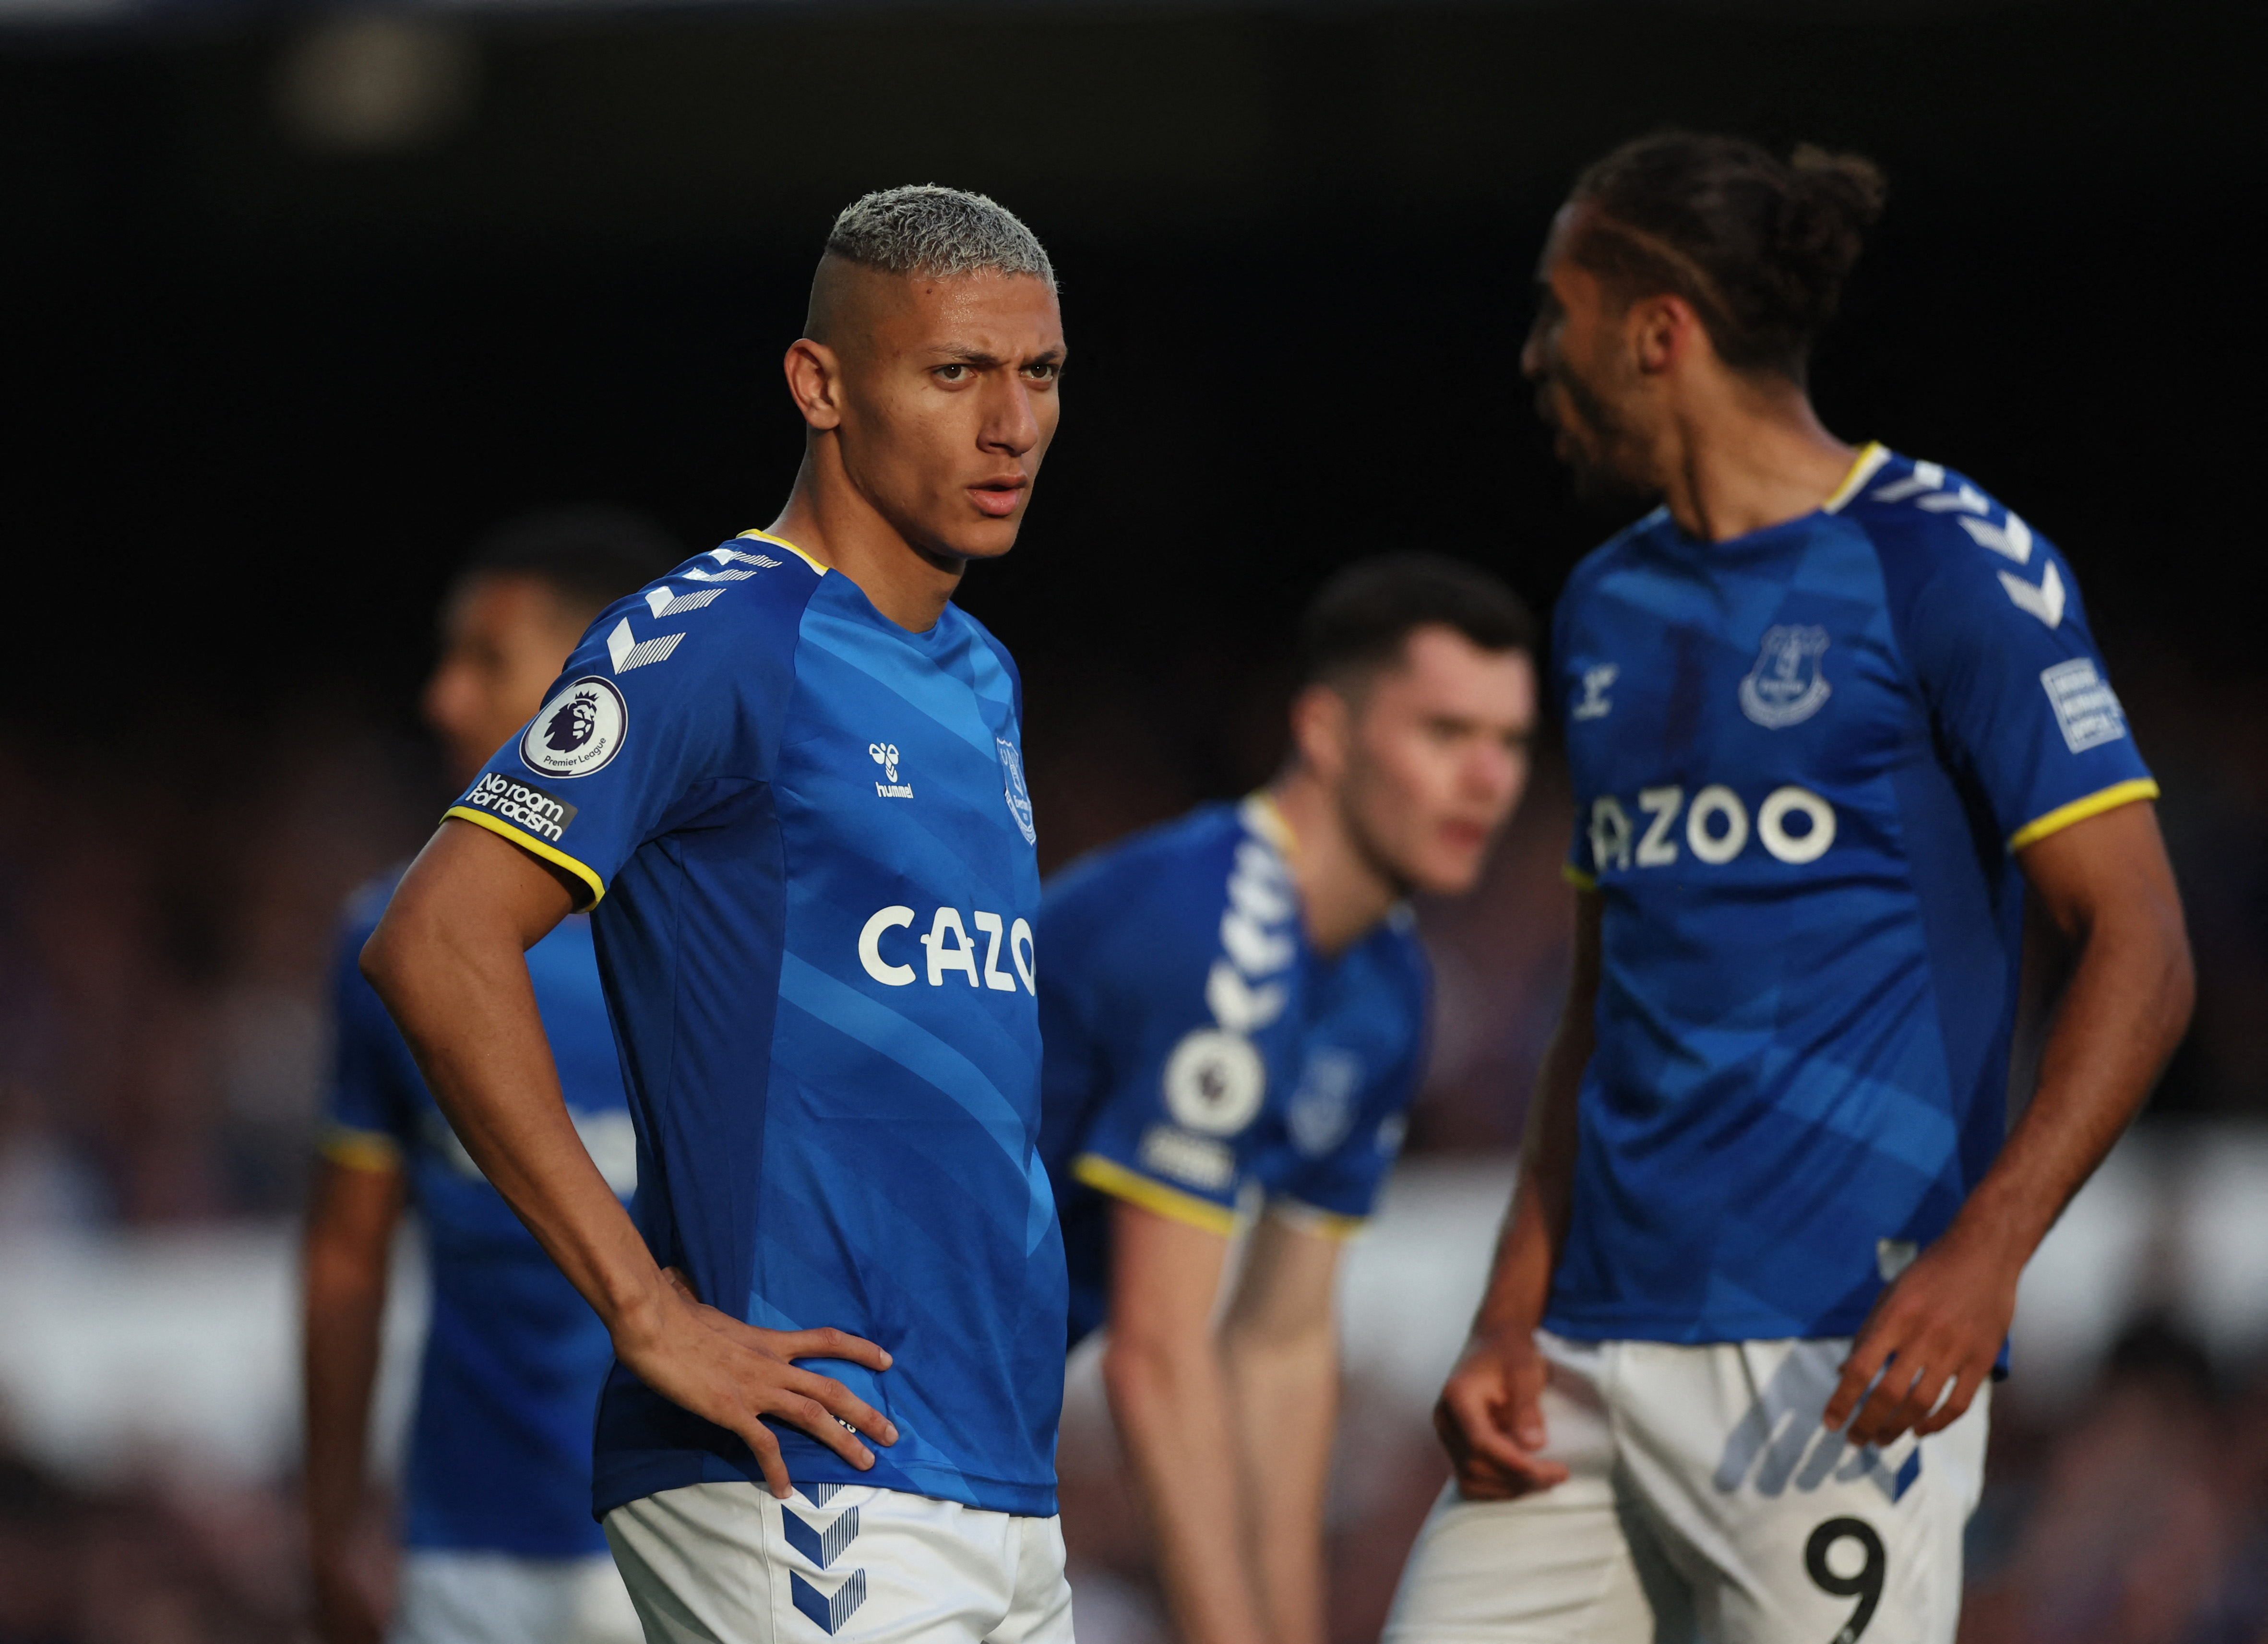 Soccer Football - Premier League - Everton v Crystal Palace - Goodison Park, Liverpool, Britain - May 19, 2022 Everton's Richarlison looks on during the match Action Images via Reuters/Carl Recine EDITORIAL USE ONLY. No use with unauthorized audio, video, data, fixture lists, club/league logos or 'live' services. Online in-match use limited to 75 images, no video emulation. No use in betting, games or single club /league/player publications.  Please contact your account representative for further details.